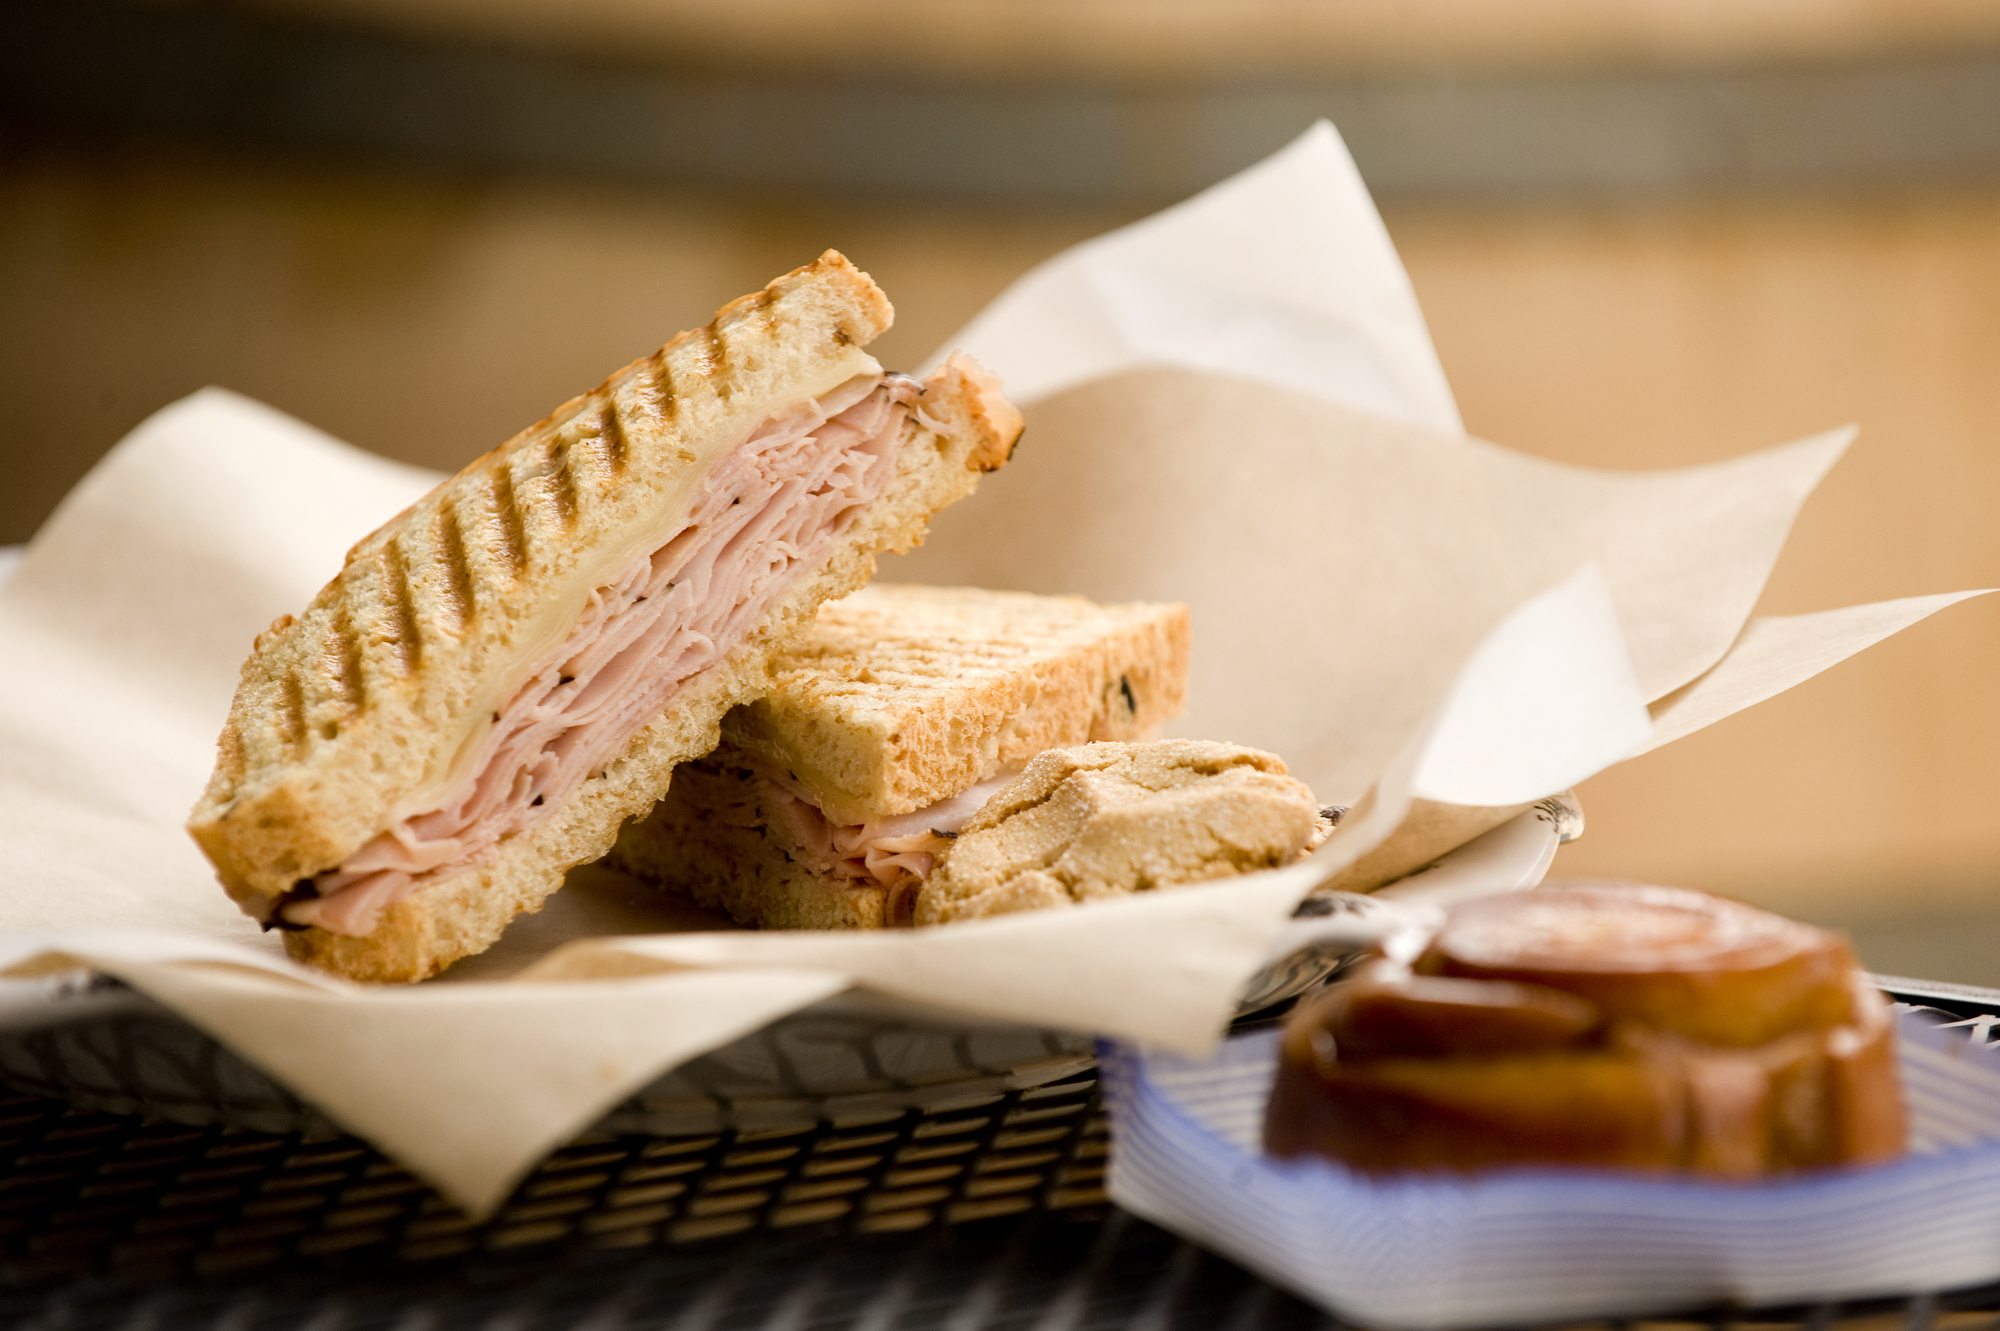 The Ham and Swiss Panini and Kahlua Cinnamon Roll at Bleu Door Bakery are both worth repeat orders.